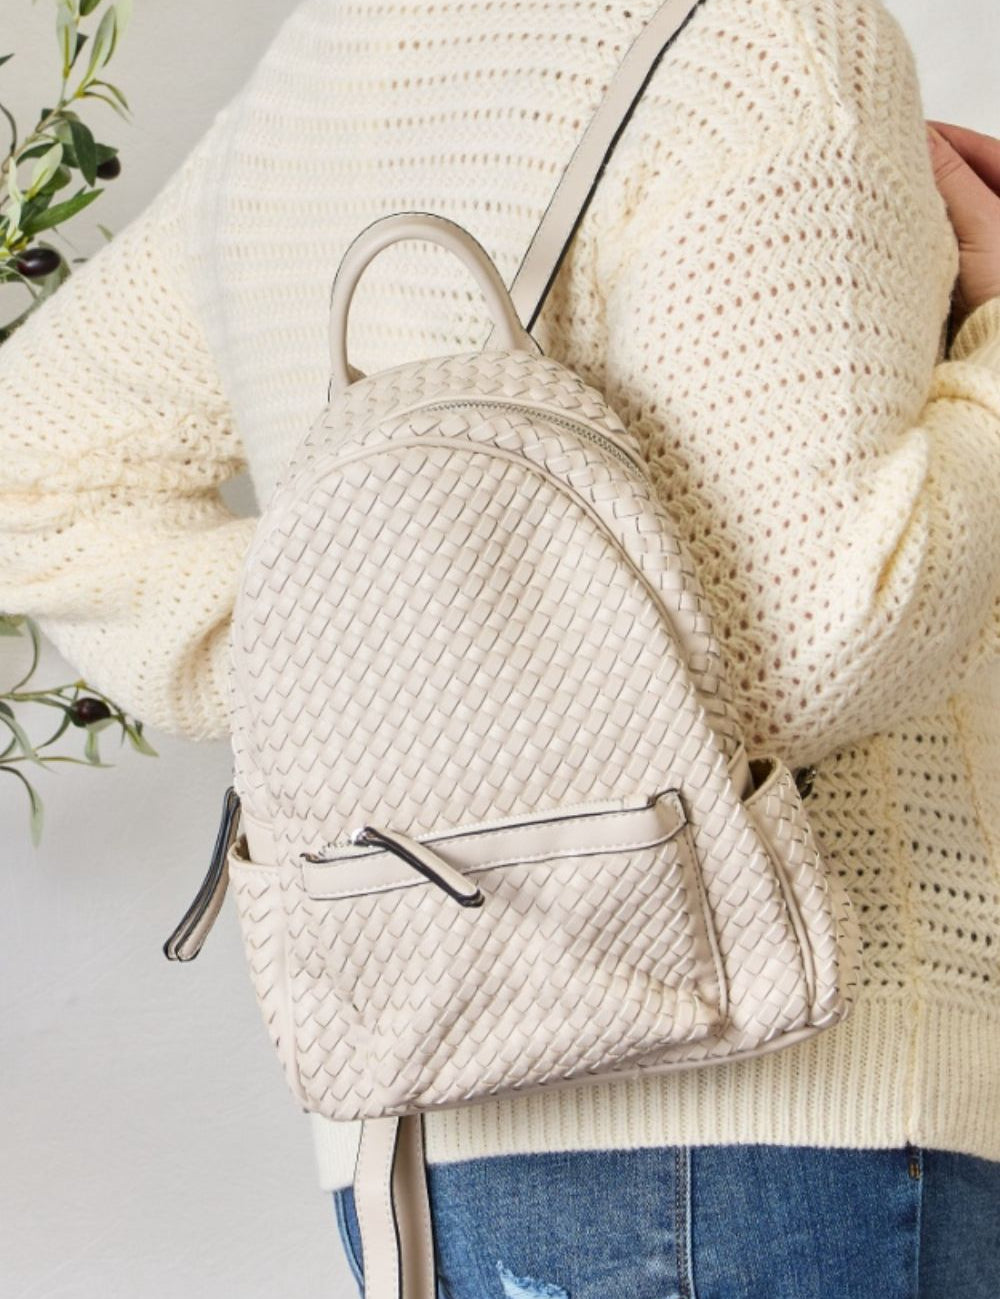 SHOMICO PU Leather Woven Backpack